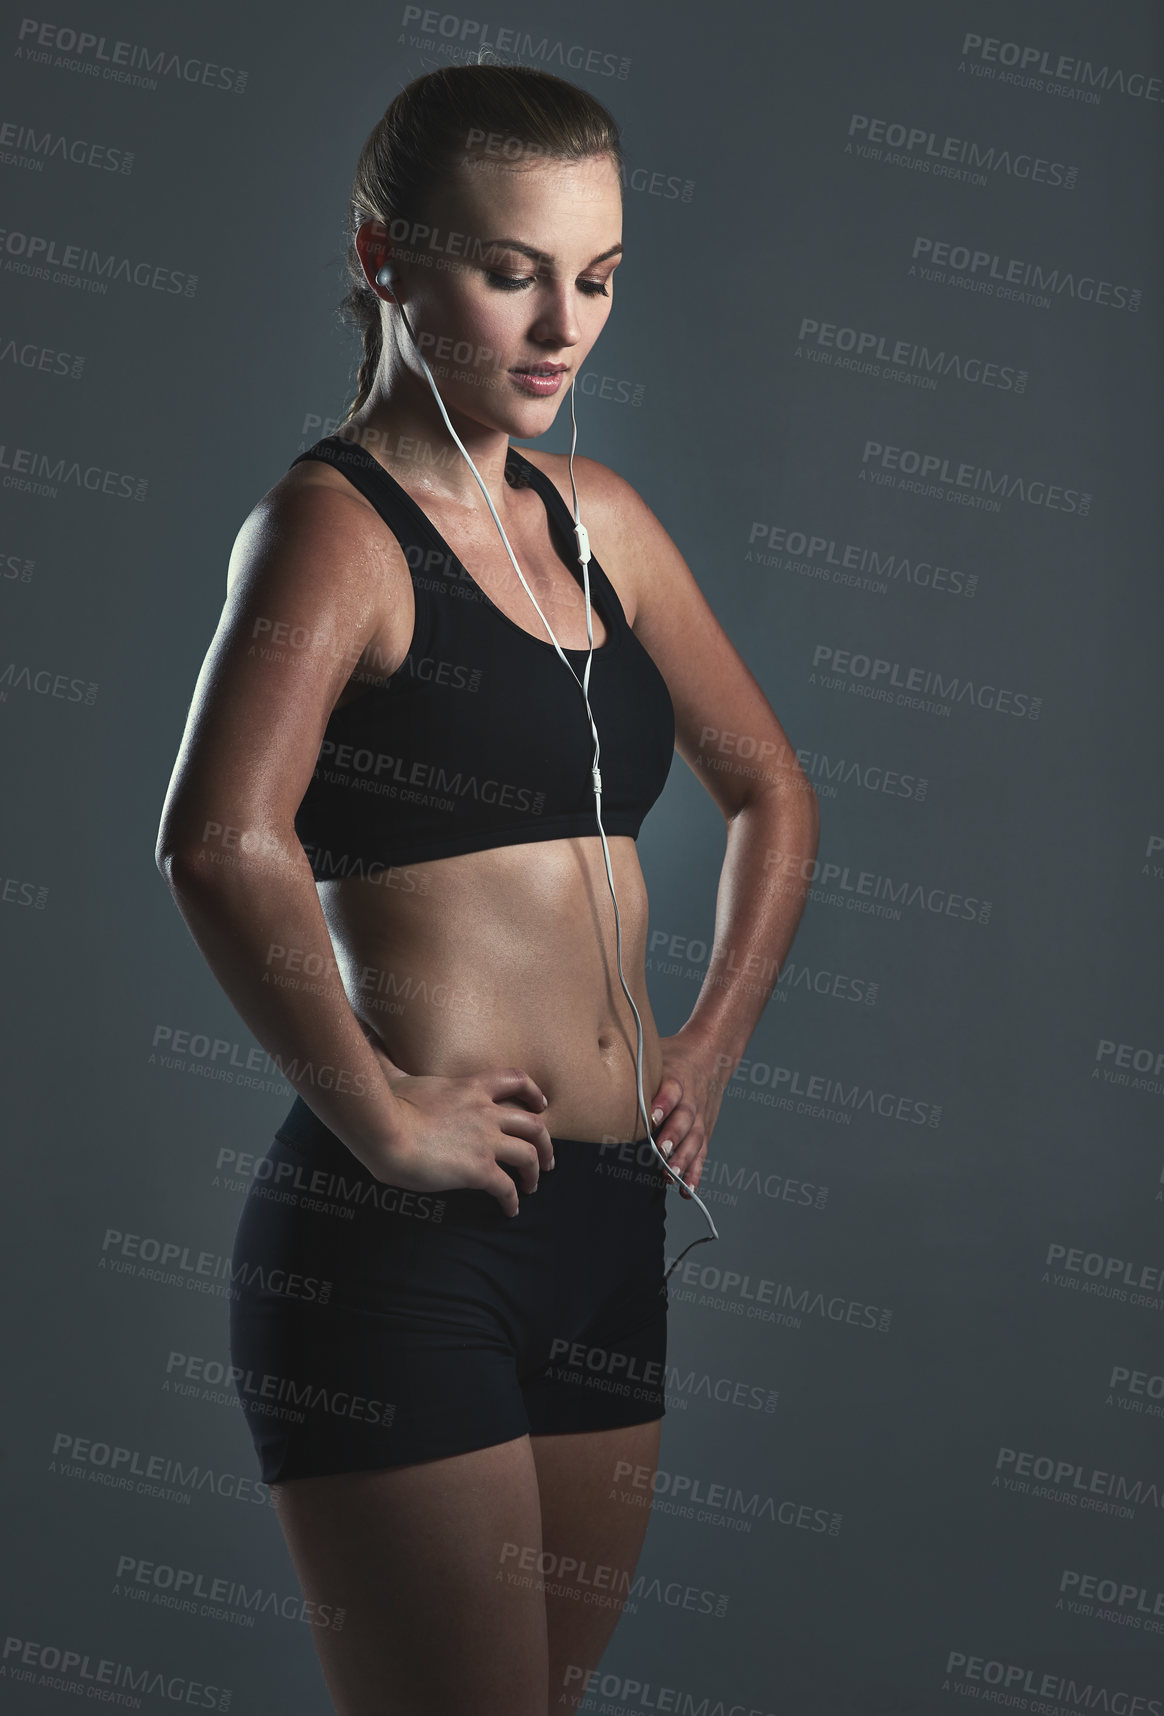 Buy stock photo Studio shot of a sporty young woman